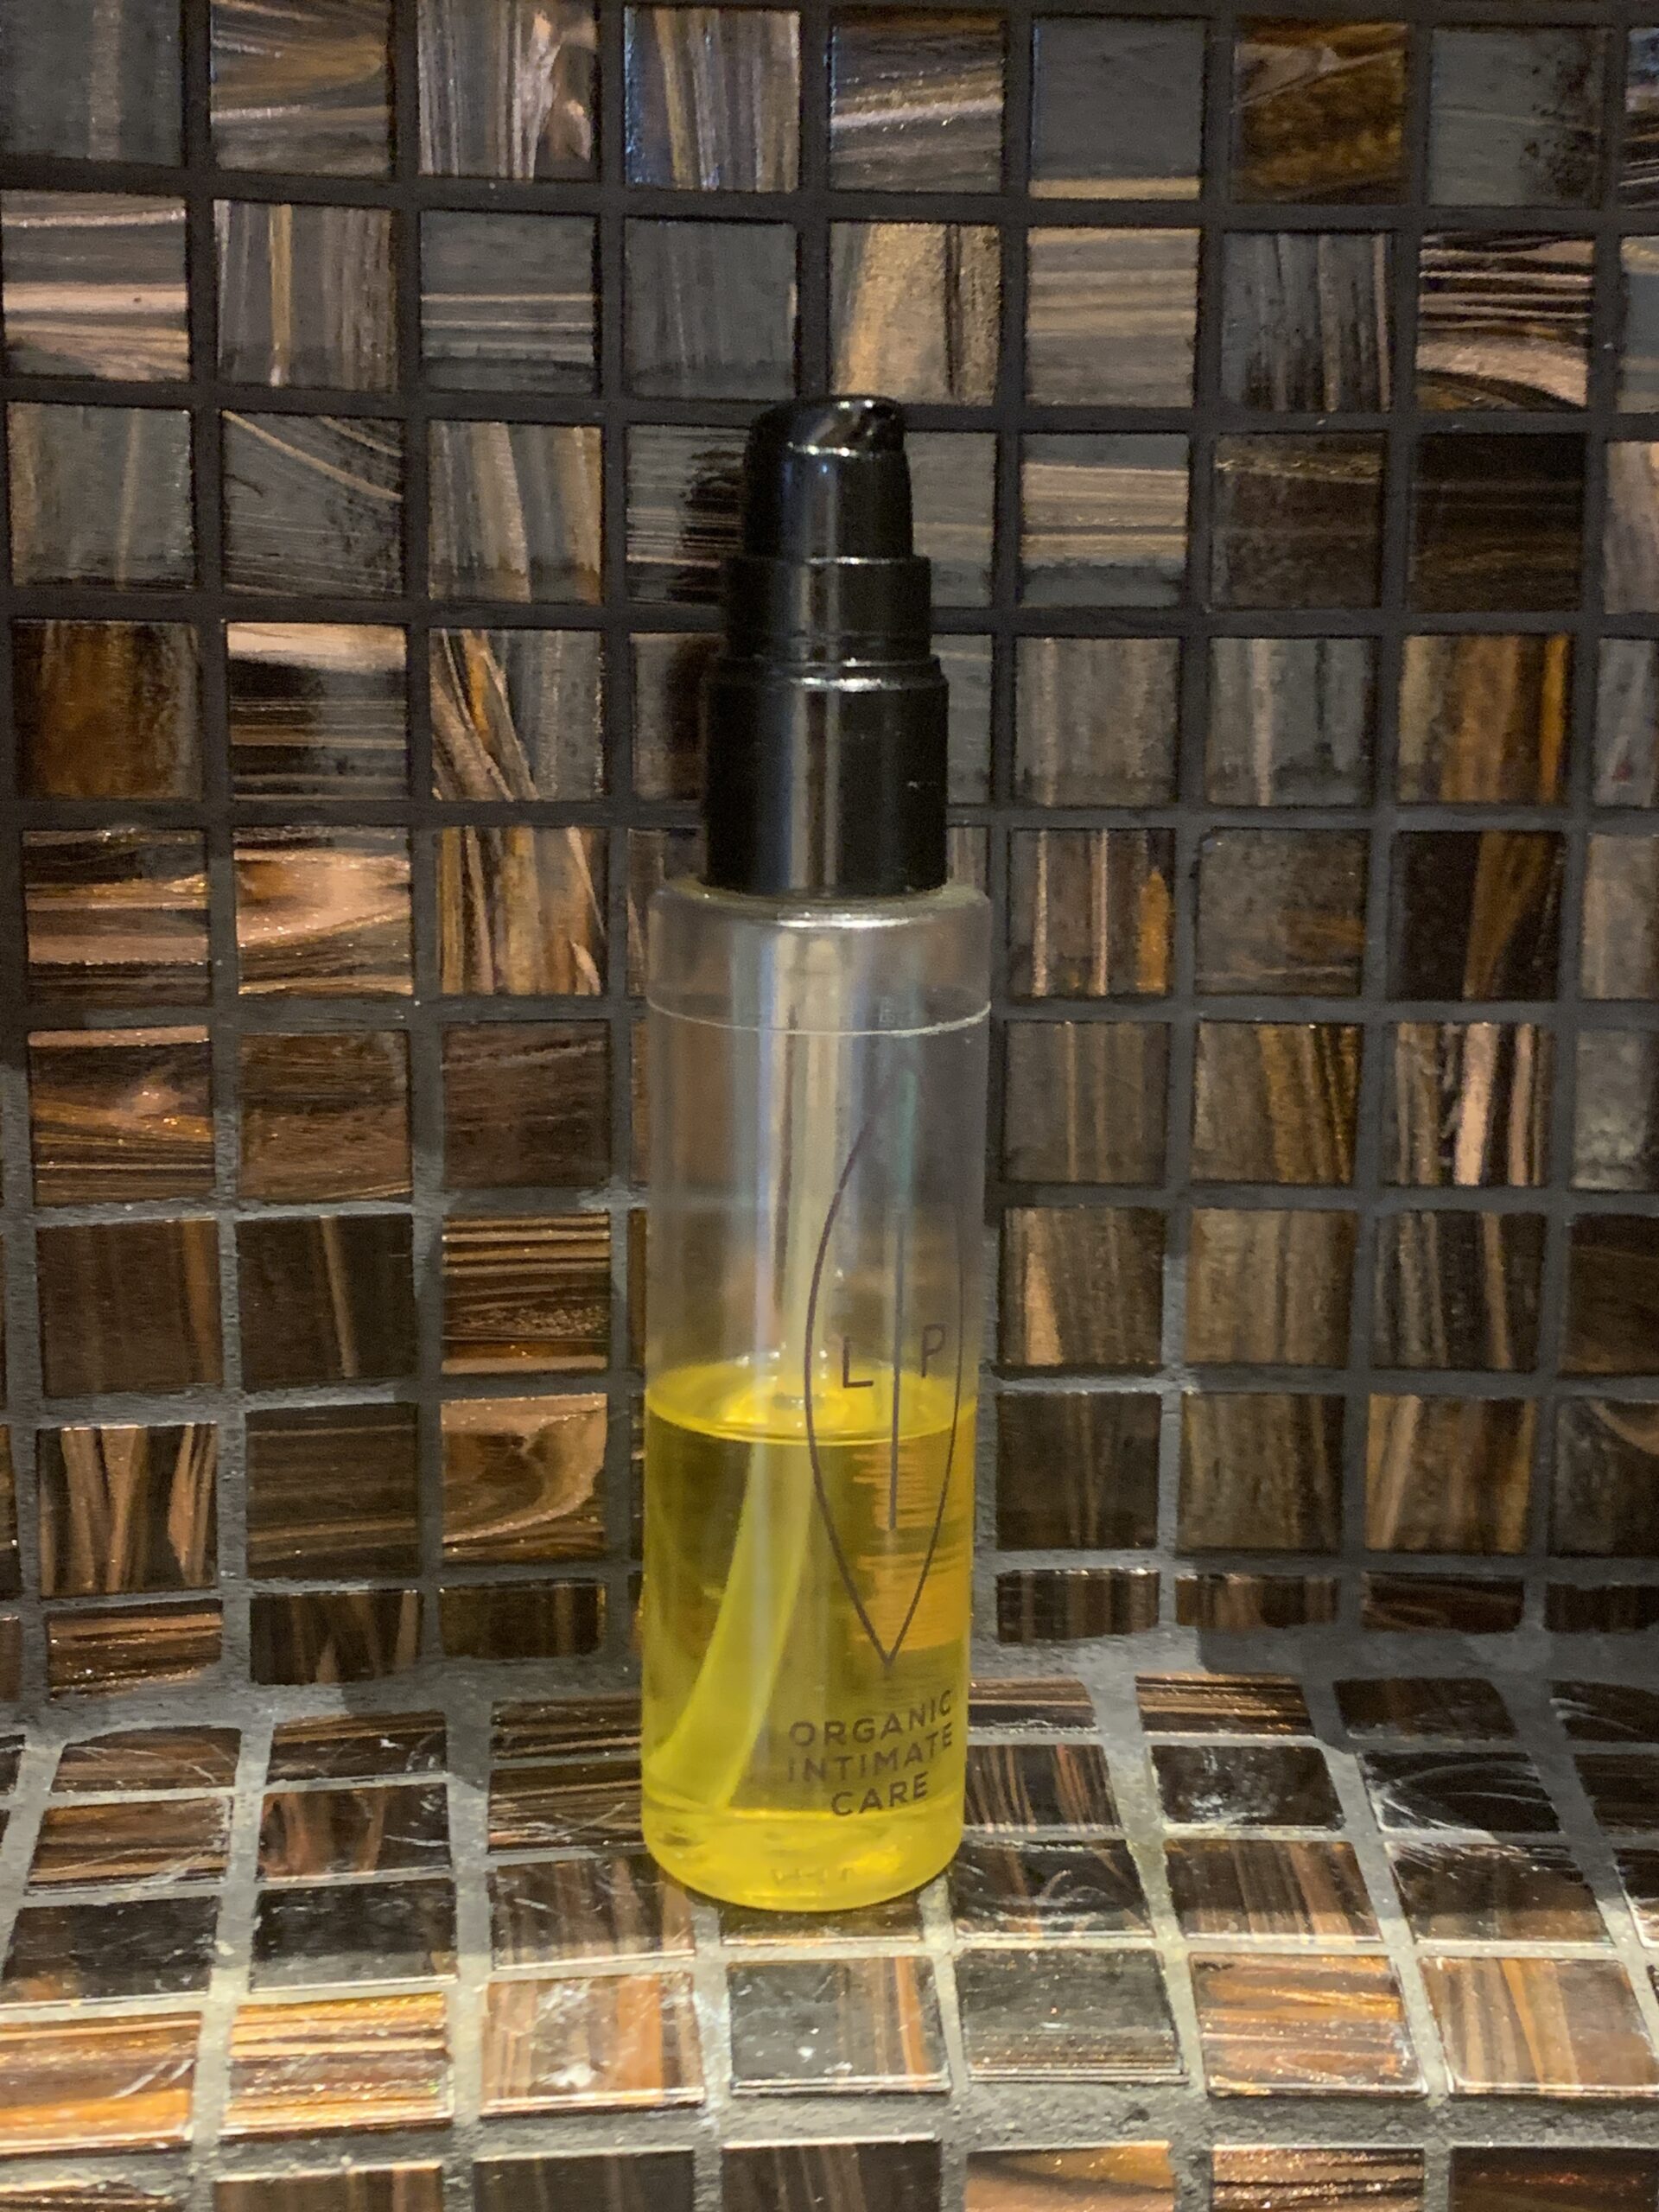 Lip organic intimate care cleansing oil